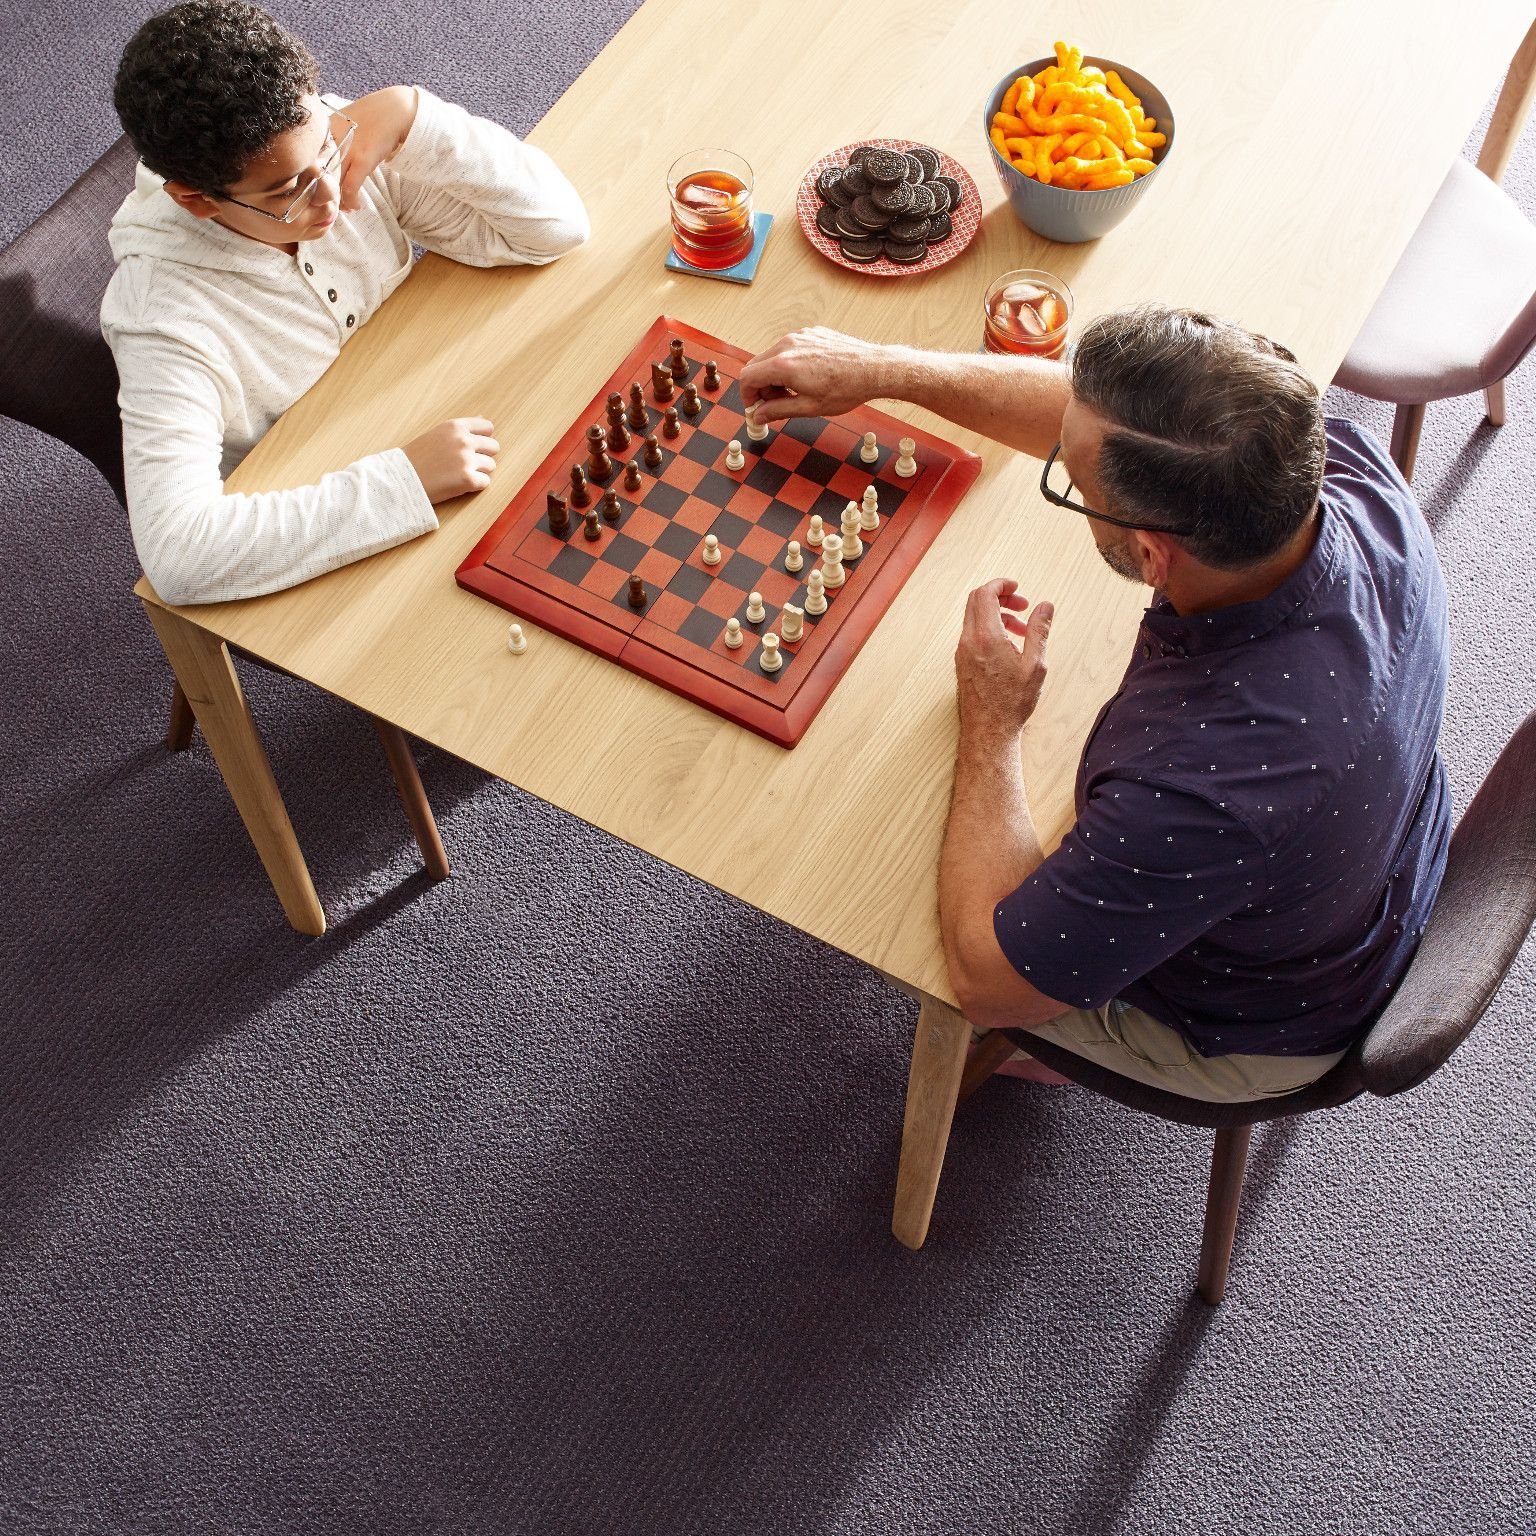 Two people playing chess - Coastal Floor Covering Inc in Crowley